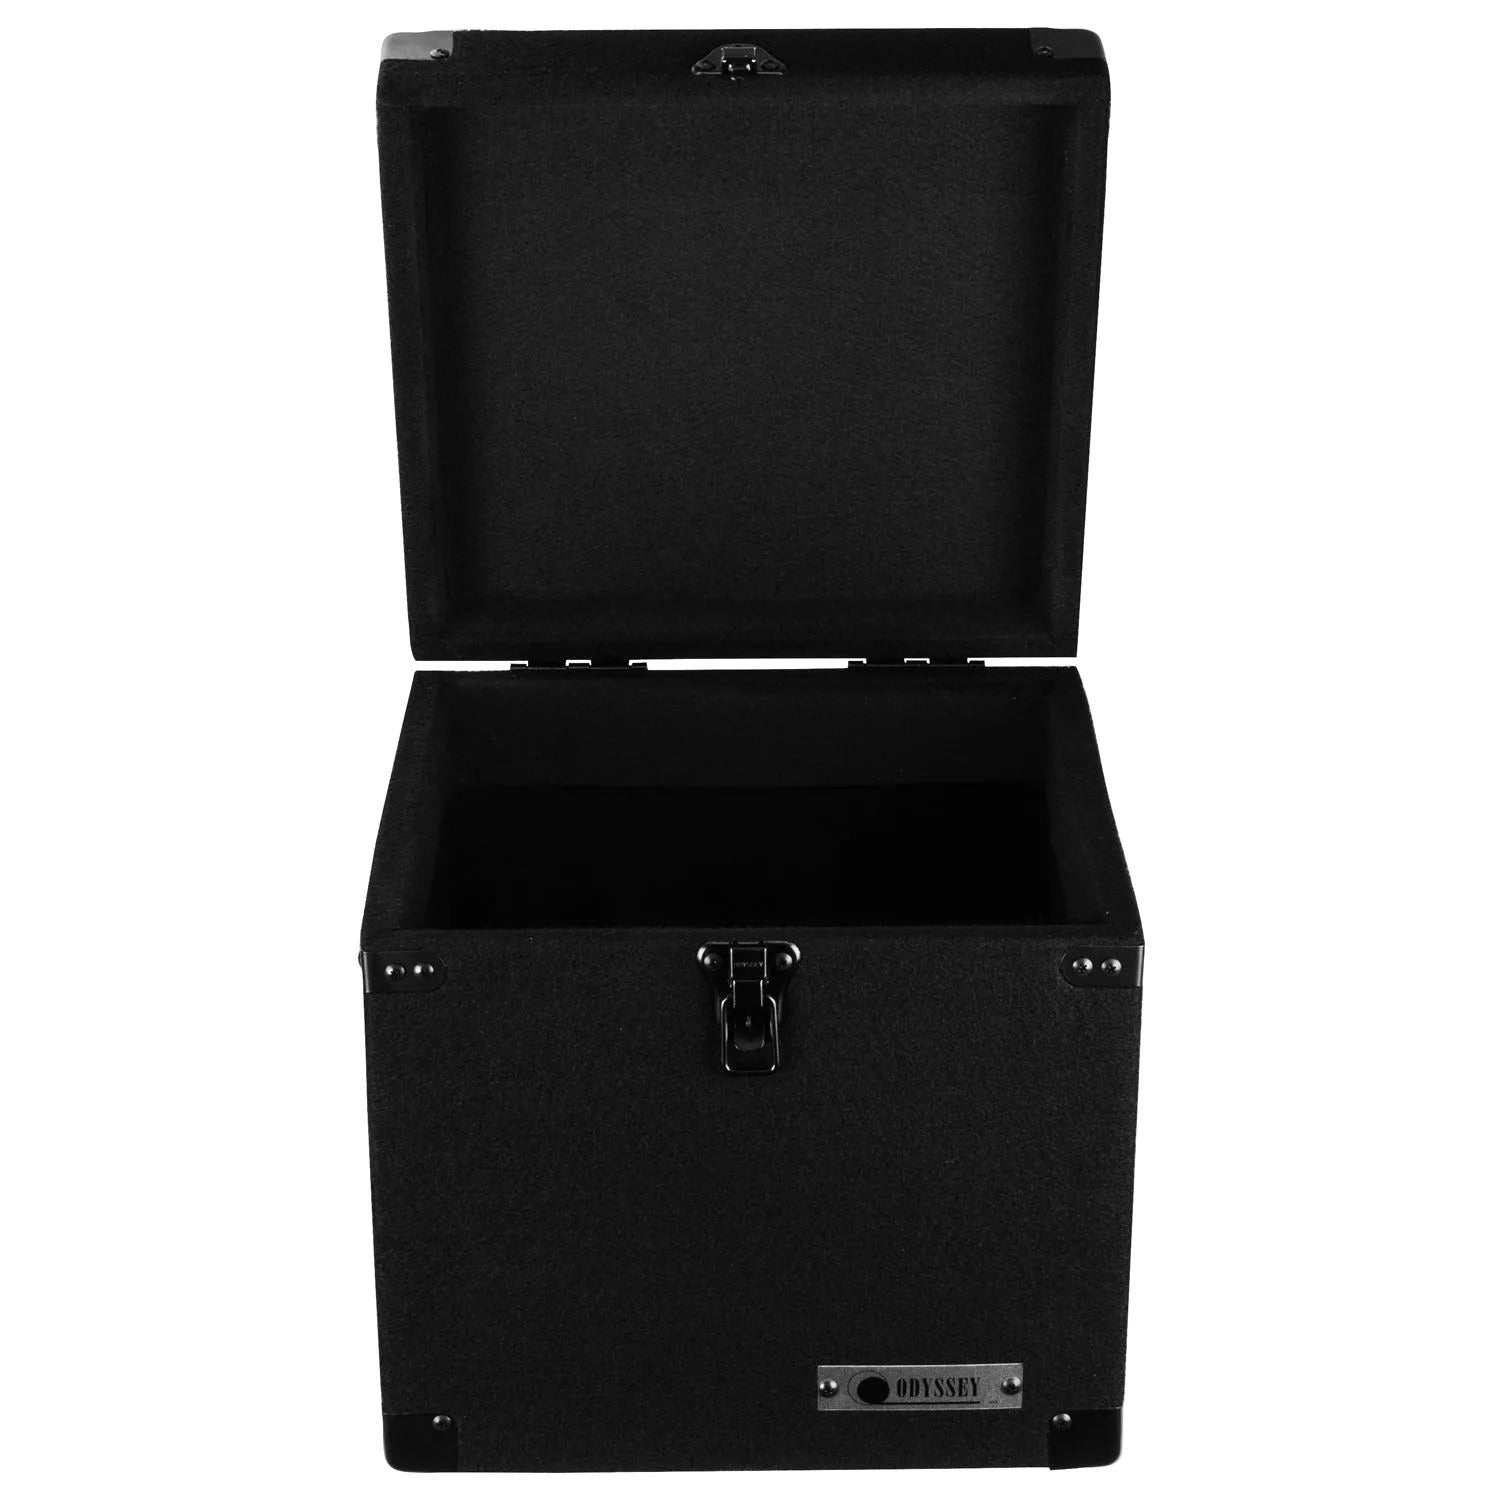 Odyssey CLP090E, Pack of 2 Carpeted DJ Cases with Detachable Lid for 90 LP Vinyl Records - Hollywood DJ